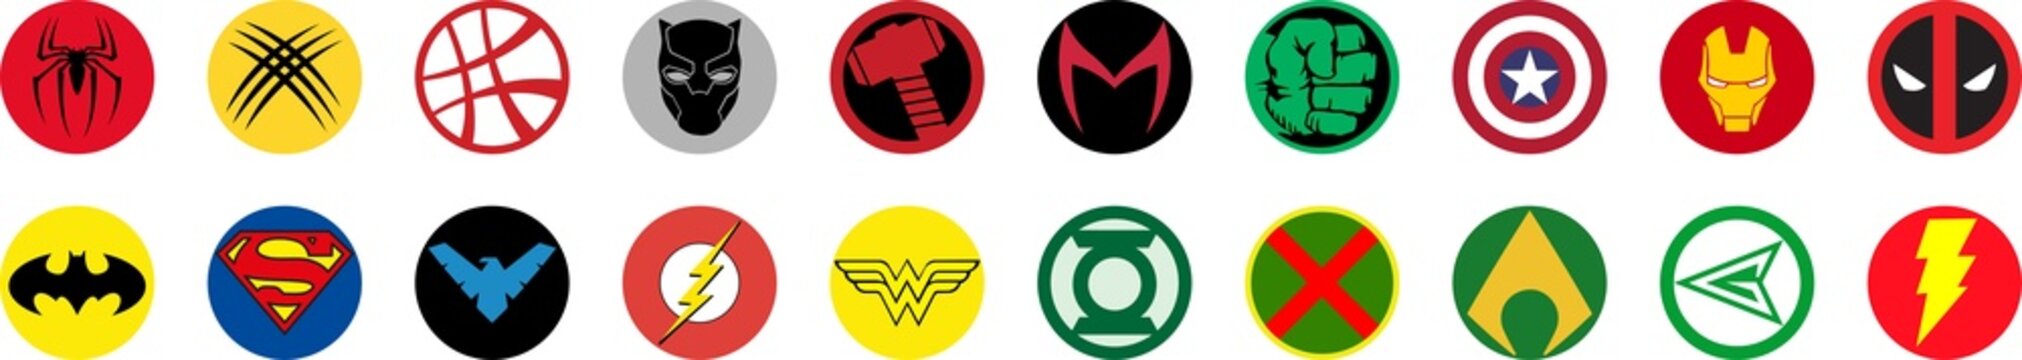 Set of famous superheroes DC and Marvel. Batman, Superman, Nightwing, Flash, Spider-Man, Deadpool, Hulk, others. PNG image